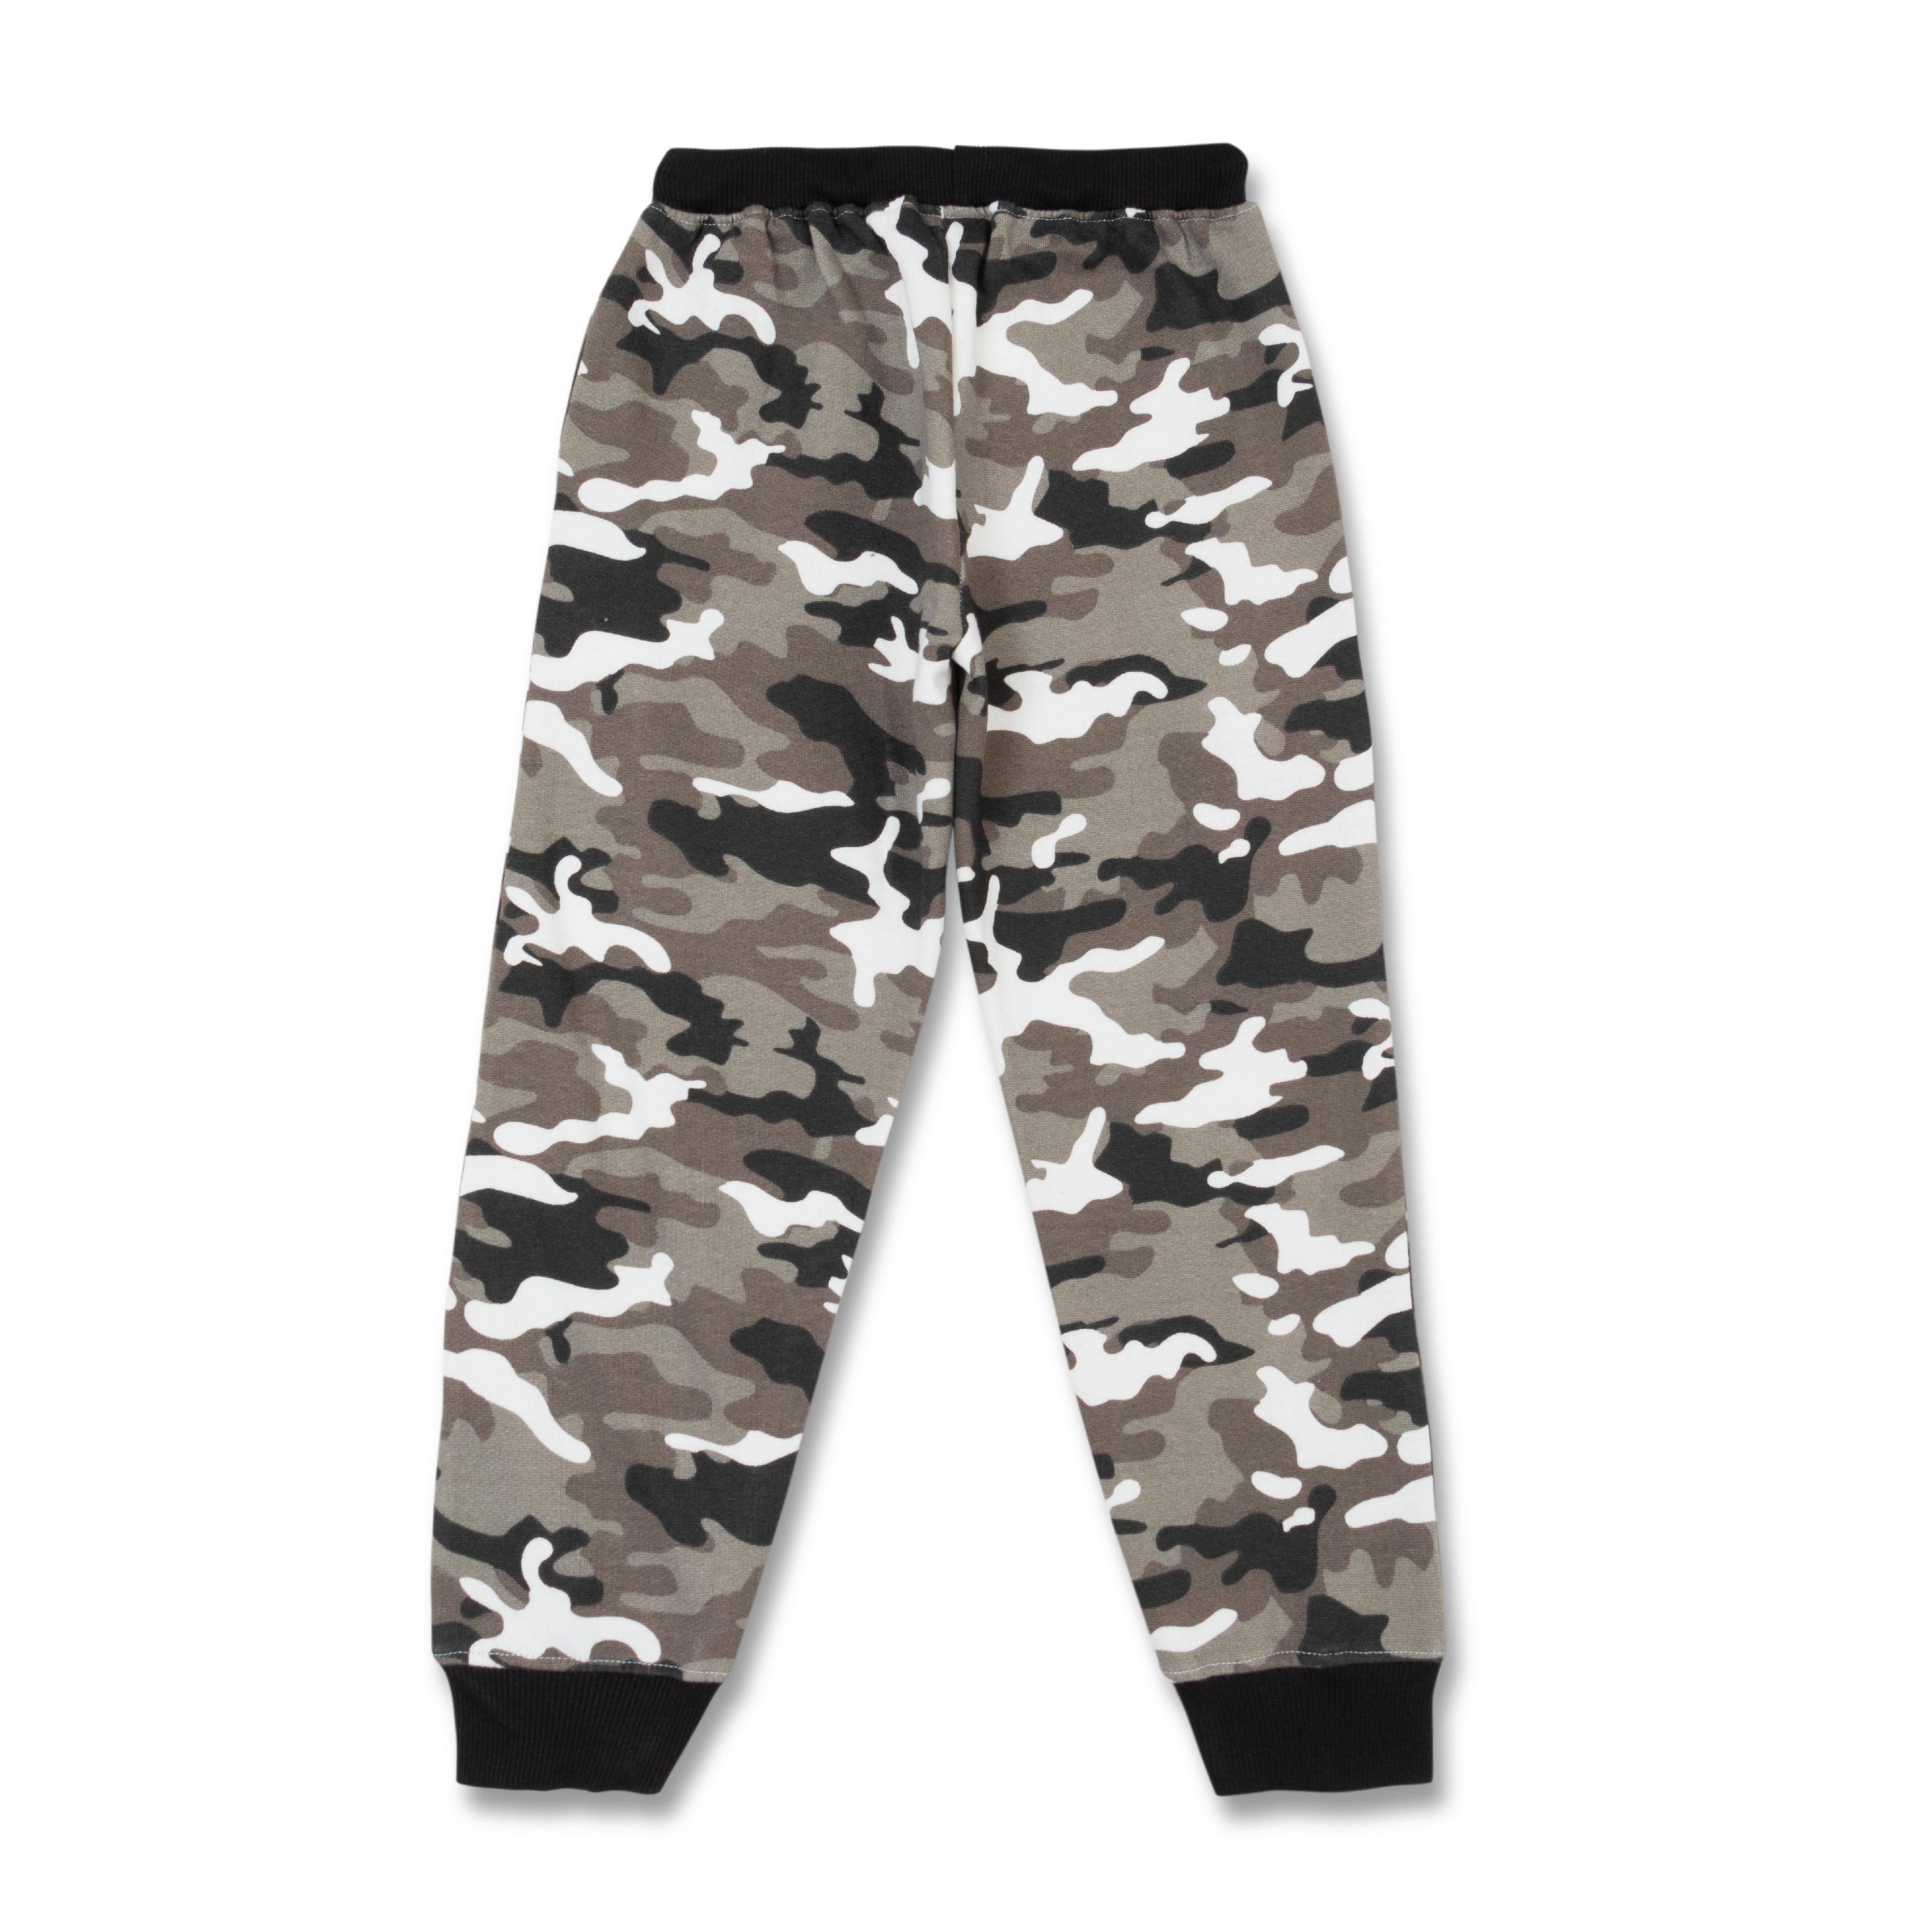 Boys Full Length Camouflage Printed Jogger Pant